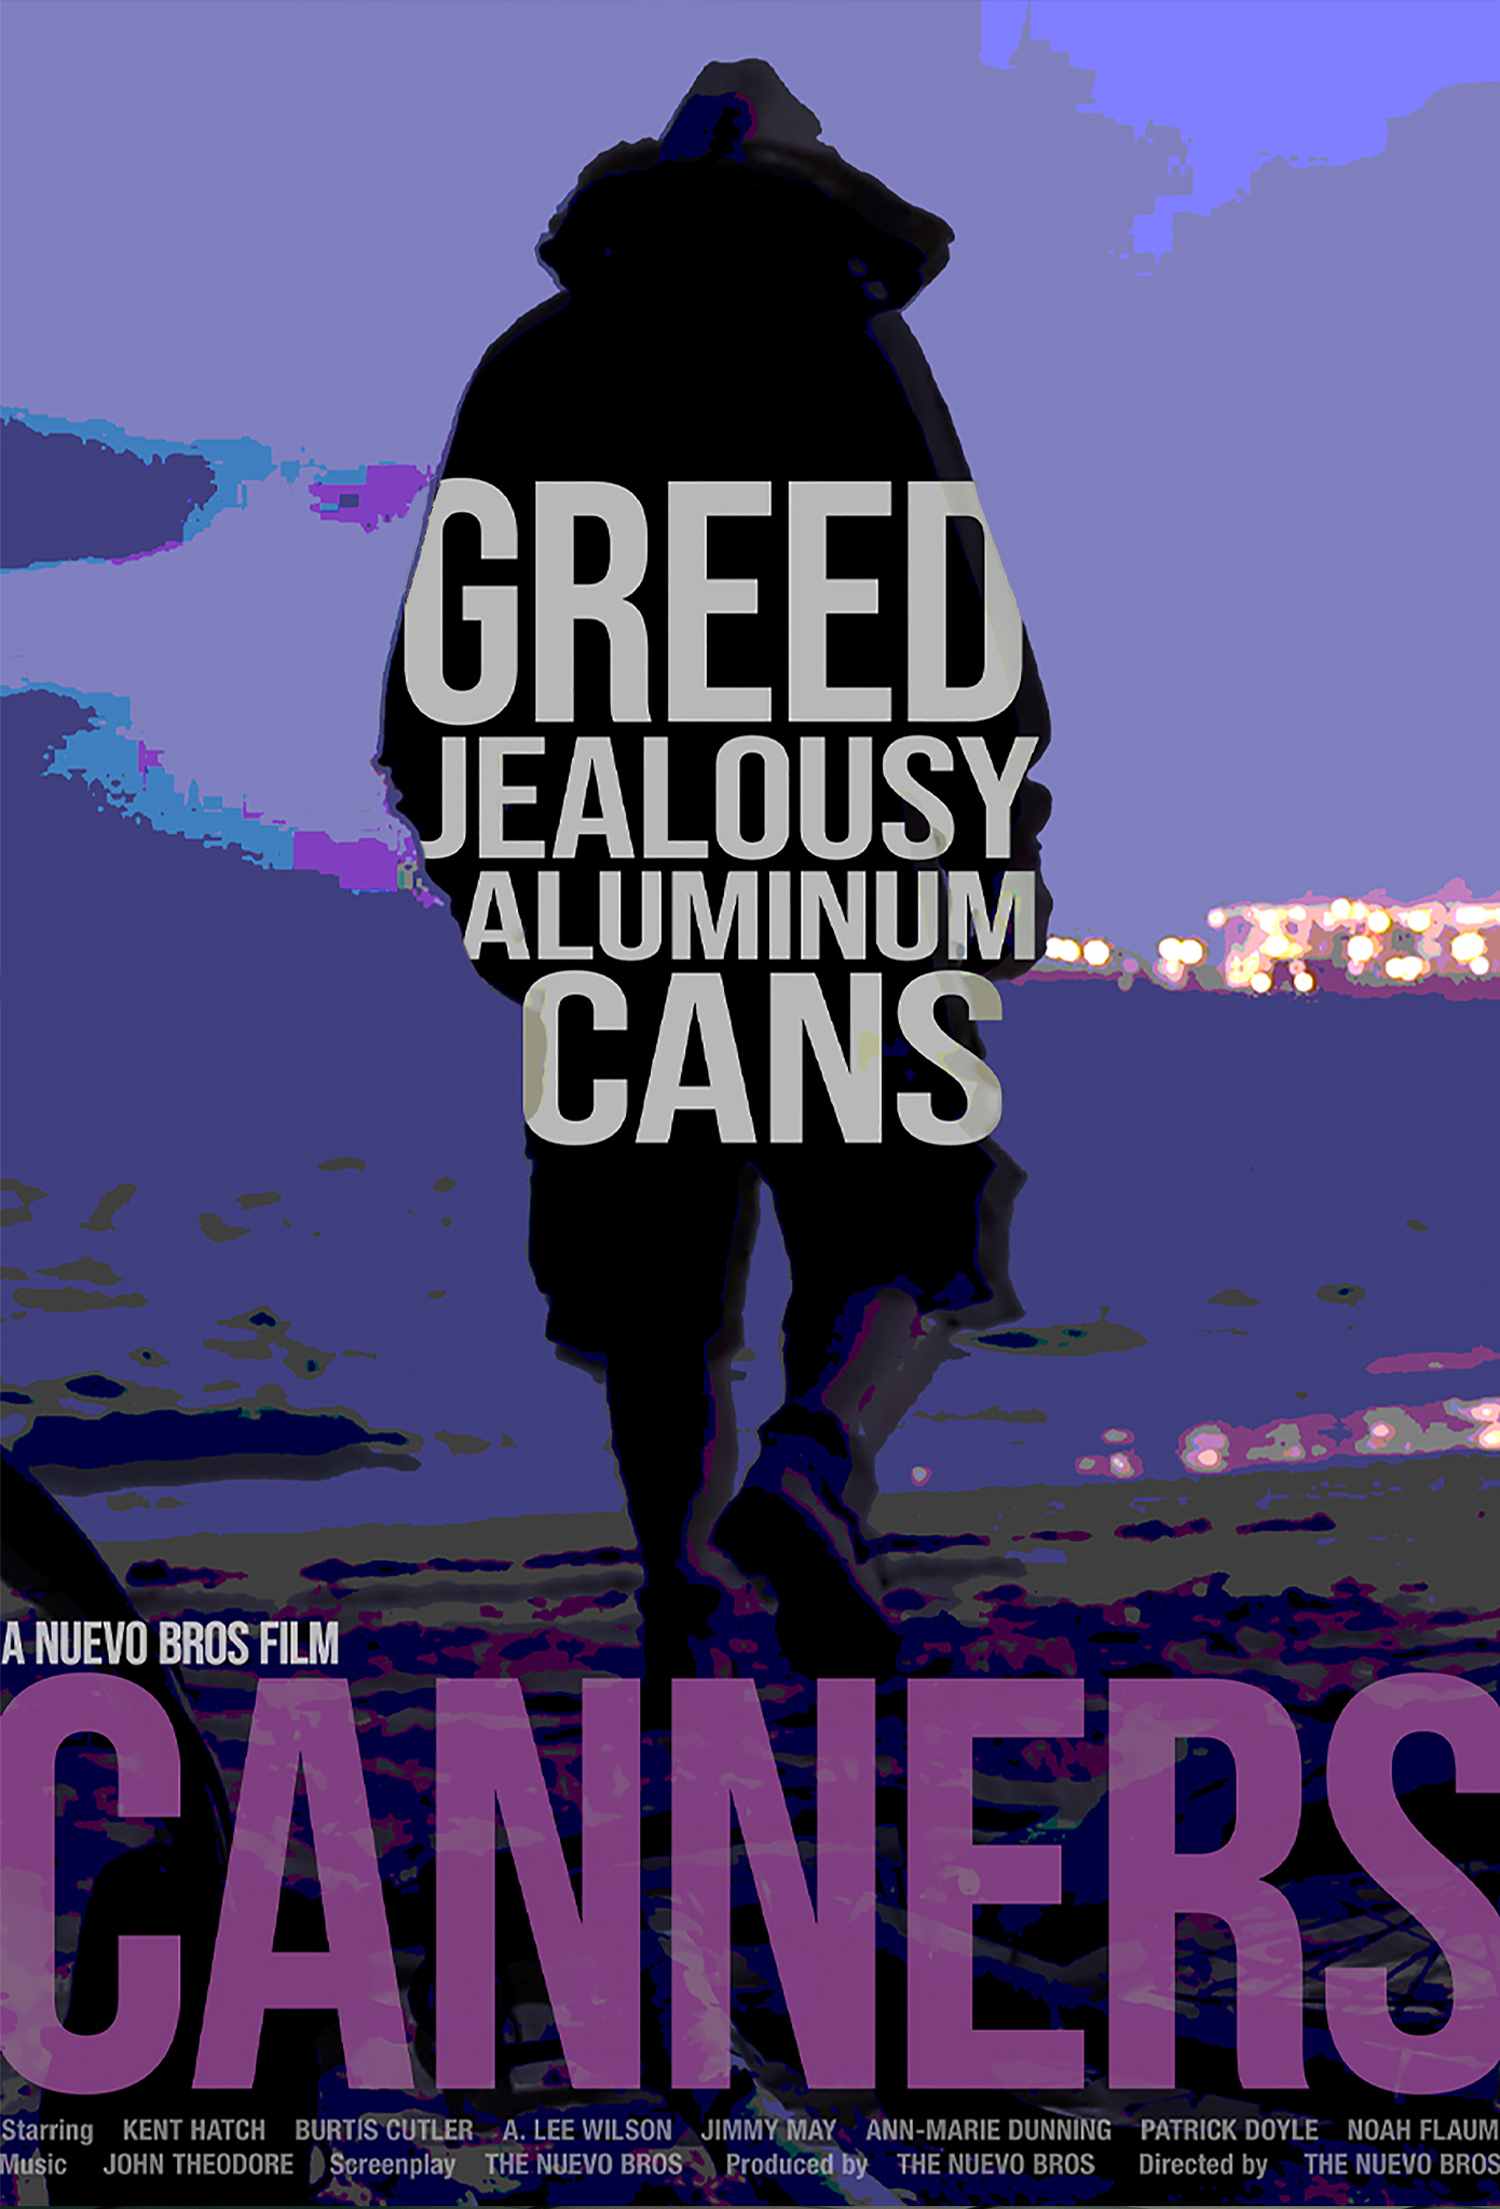 Canners short film movie poster in full size